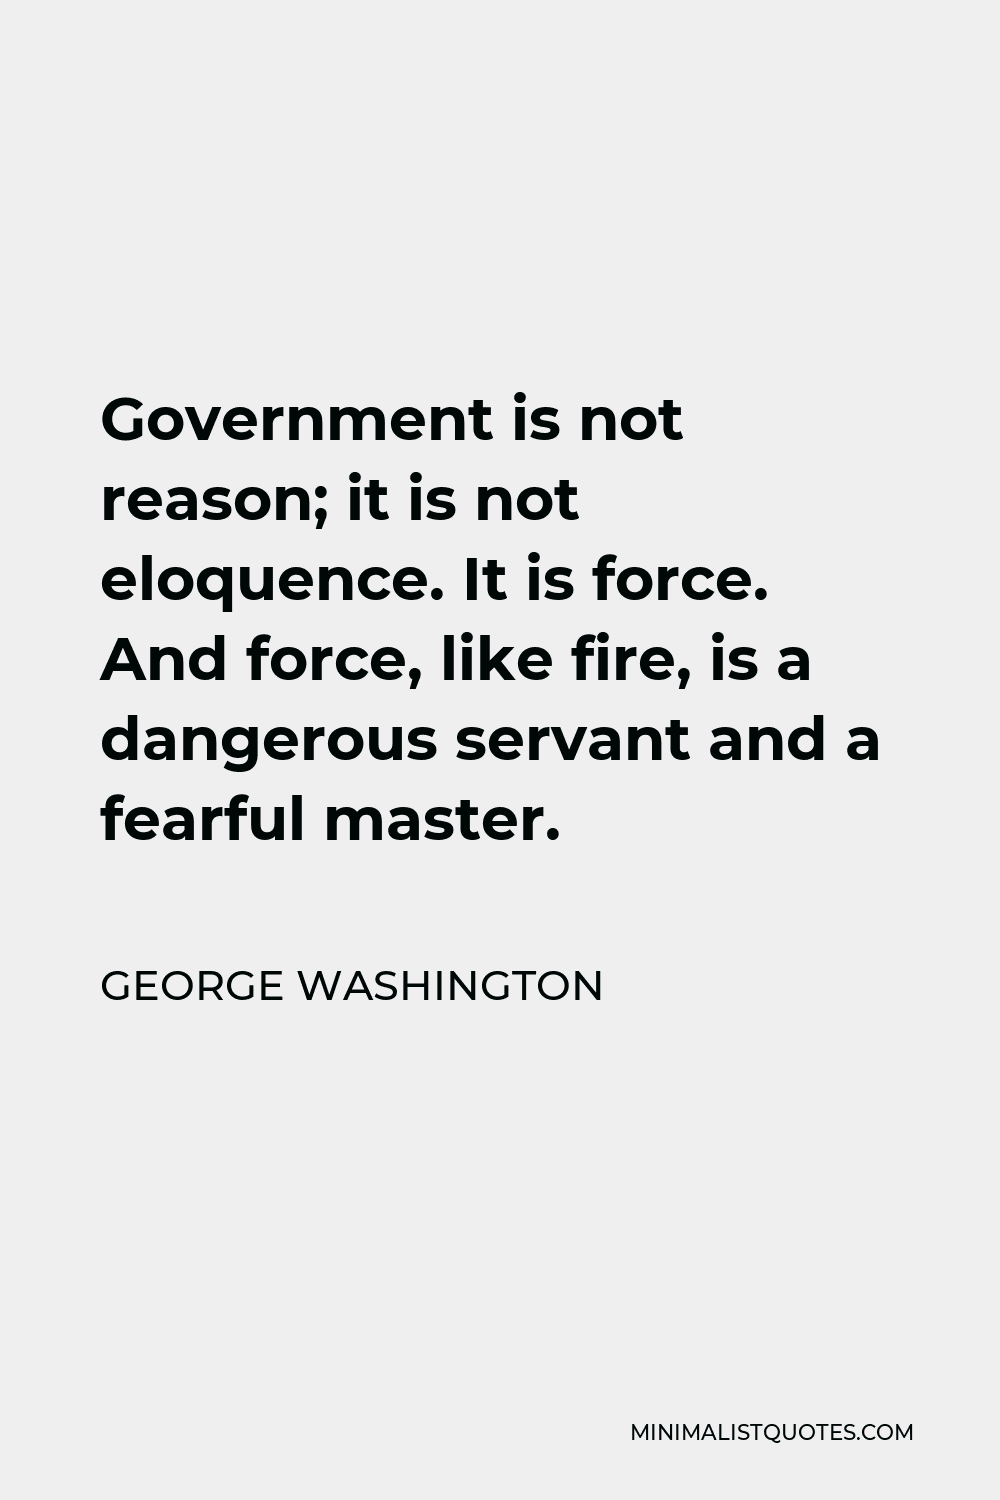 George Washington Quote - Government is not reason; it is not eloquence. It is force. And force, like fire, is a dangerous servant and a fearful master.